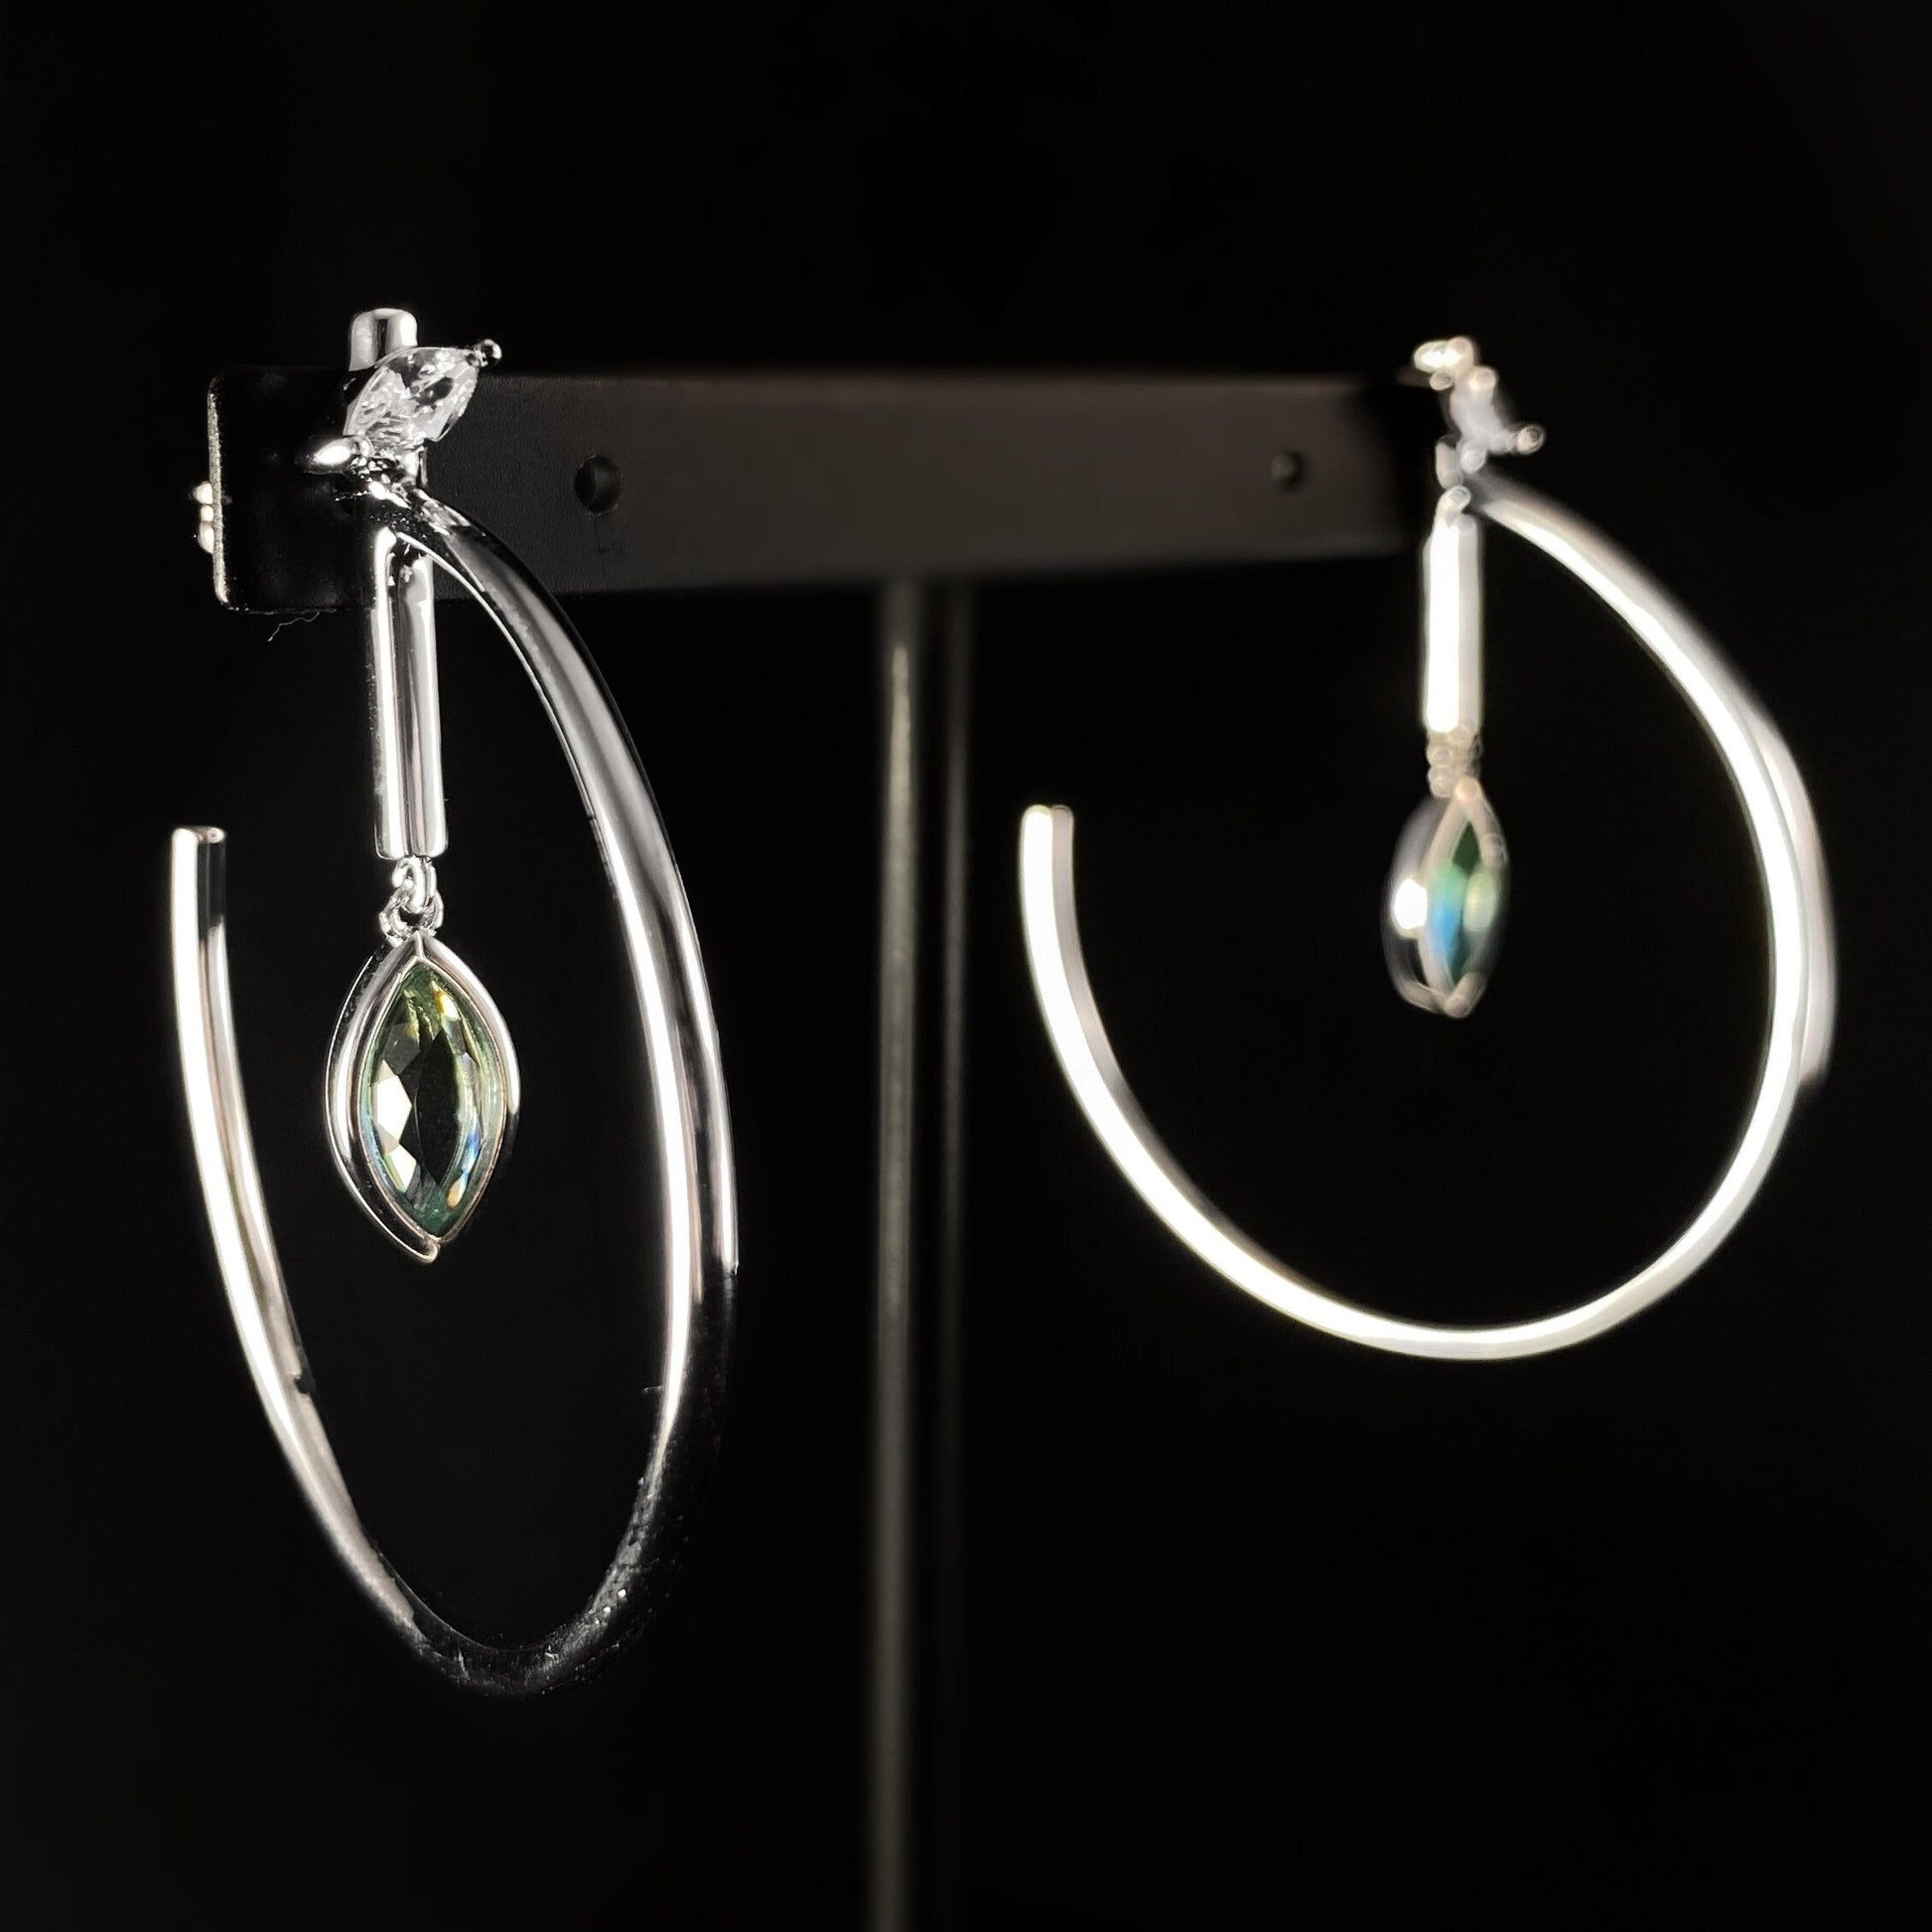 1920s Silver Statement Hoops Earrings with Green Marquise Quartz Stone - Ocean Marquise